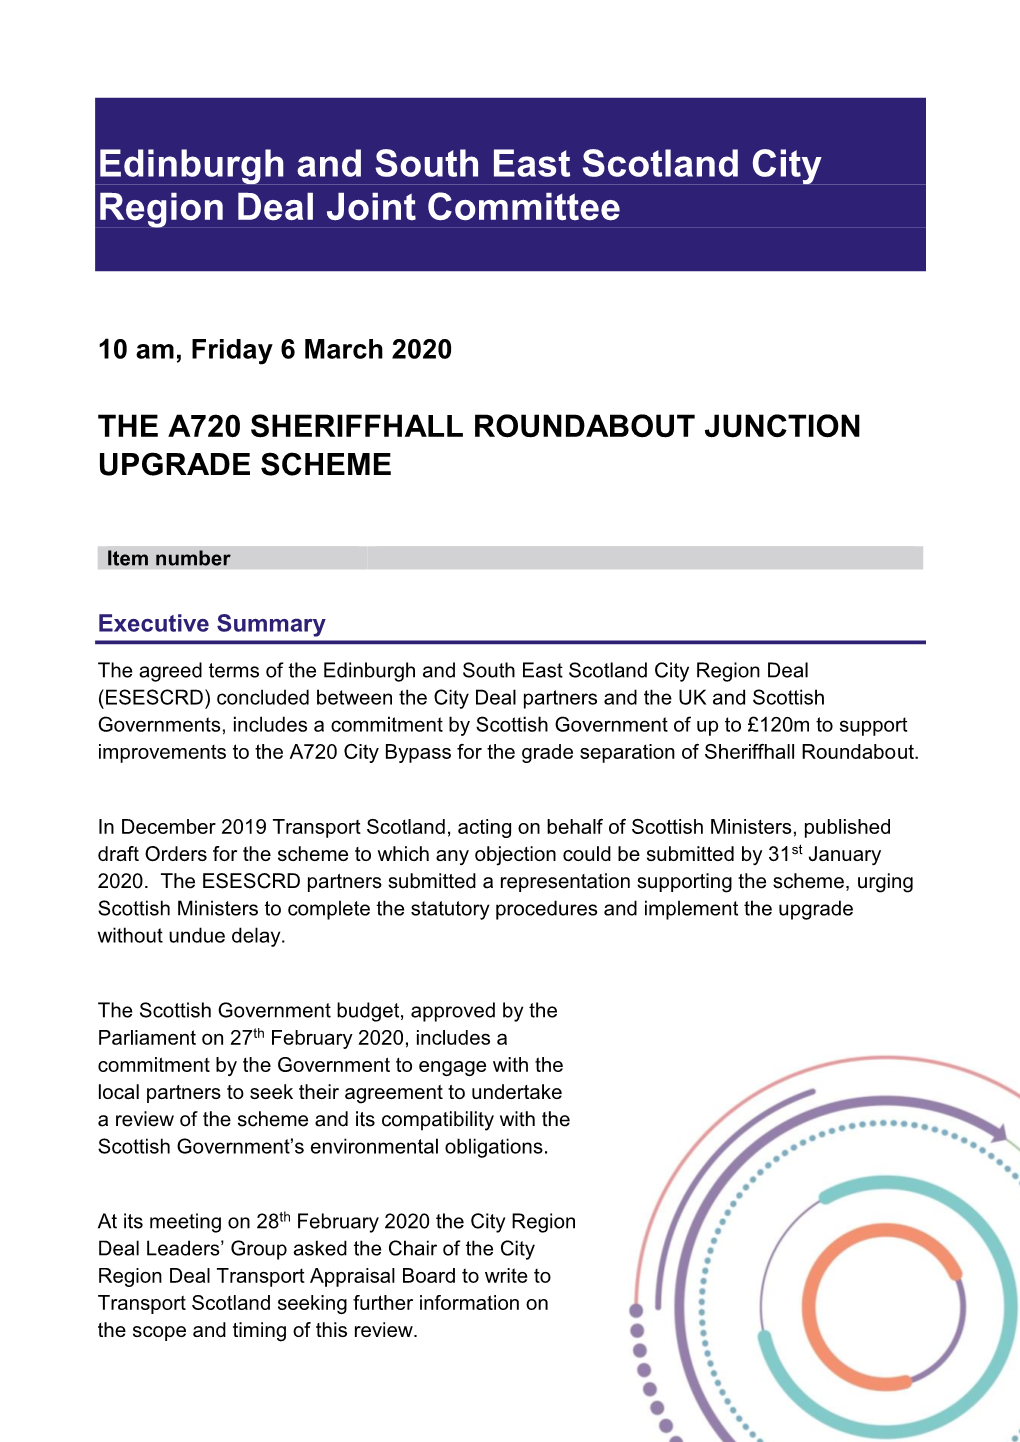 The A720 Sheriffhall Roundabout Junction Upgrade Scheme PDF